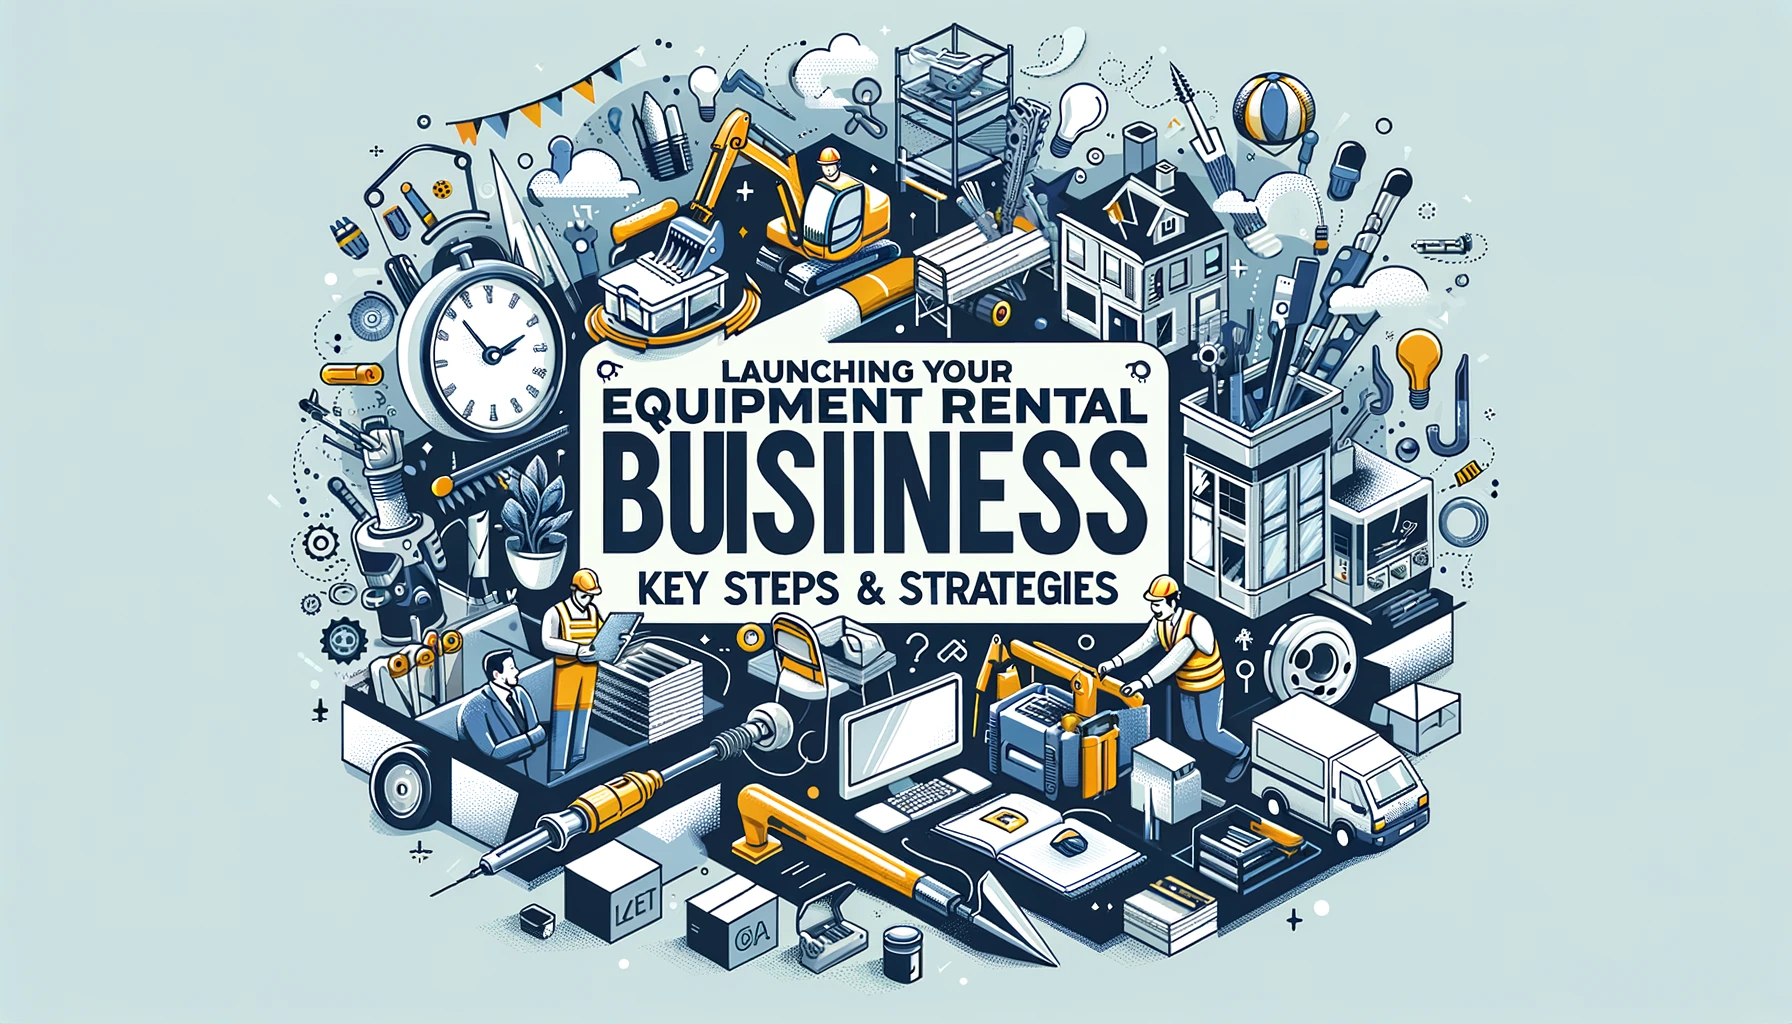 Embarking on an Equipment Rental Business Journey? This article covers everything from market research to leveraging technology for growth. With strategic insights and practical tips, we guide you through effectively setting up, managing, and expanding your rental business. Embrace the opportunity to realize your entrepreneurial dreams with our comprehensive guide. Start now and lead the rental market with confidence!